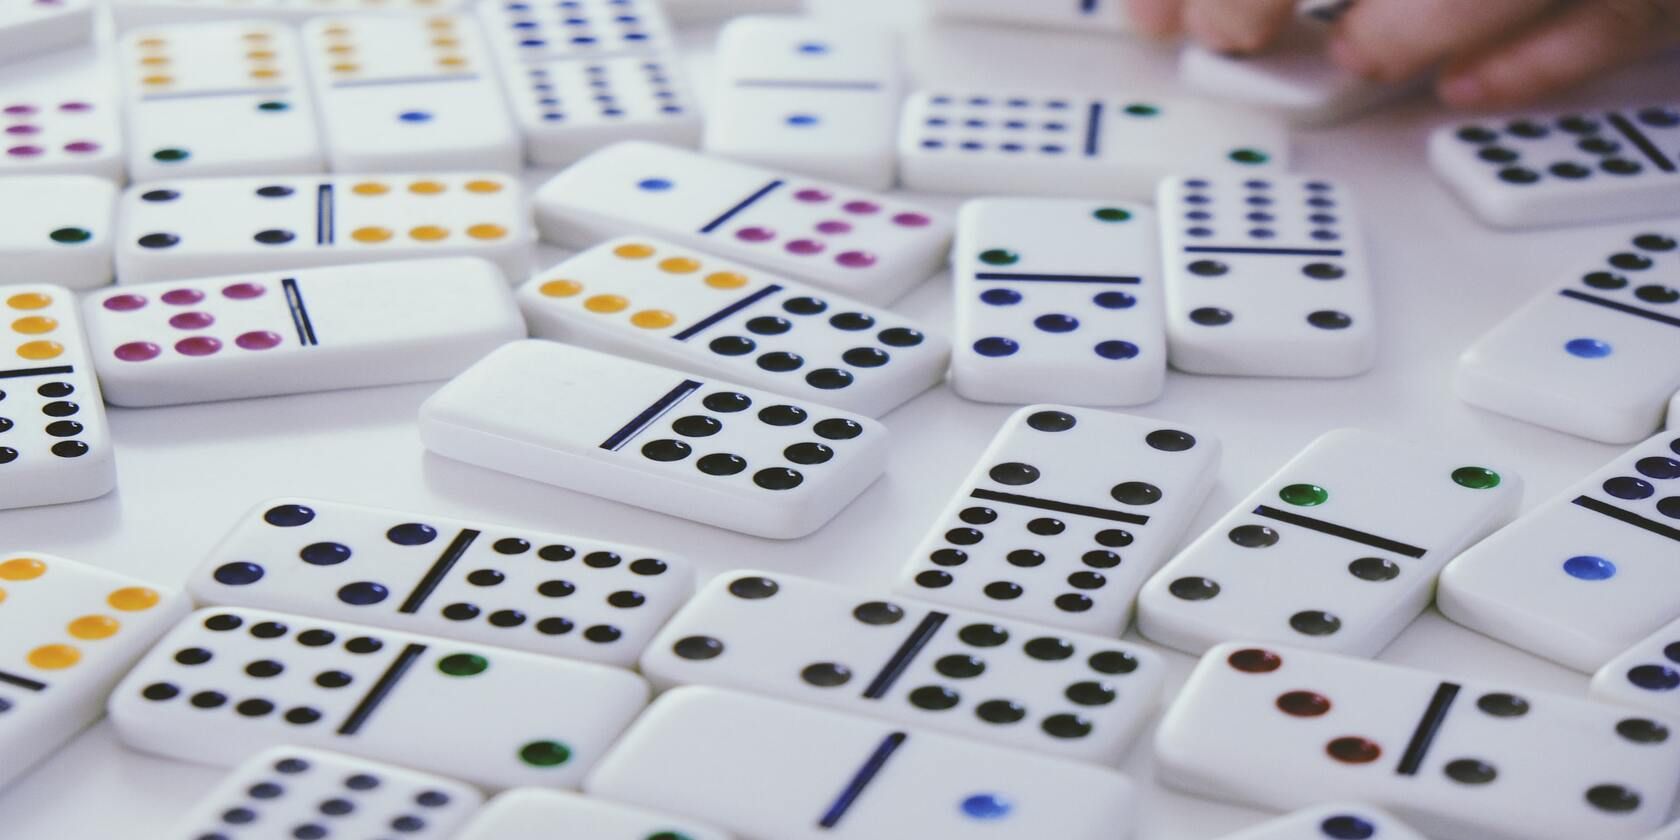 Several dominoes showing different combinations of points